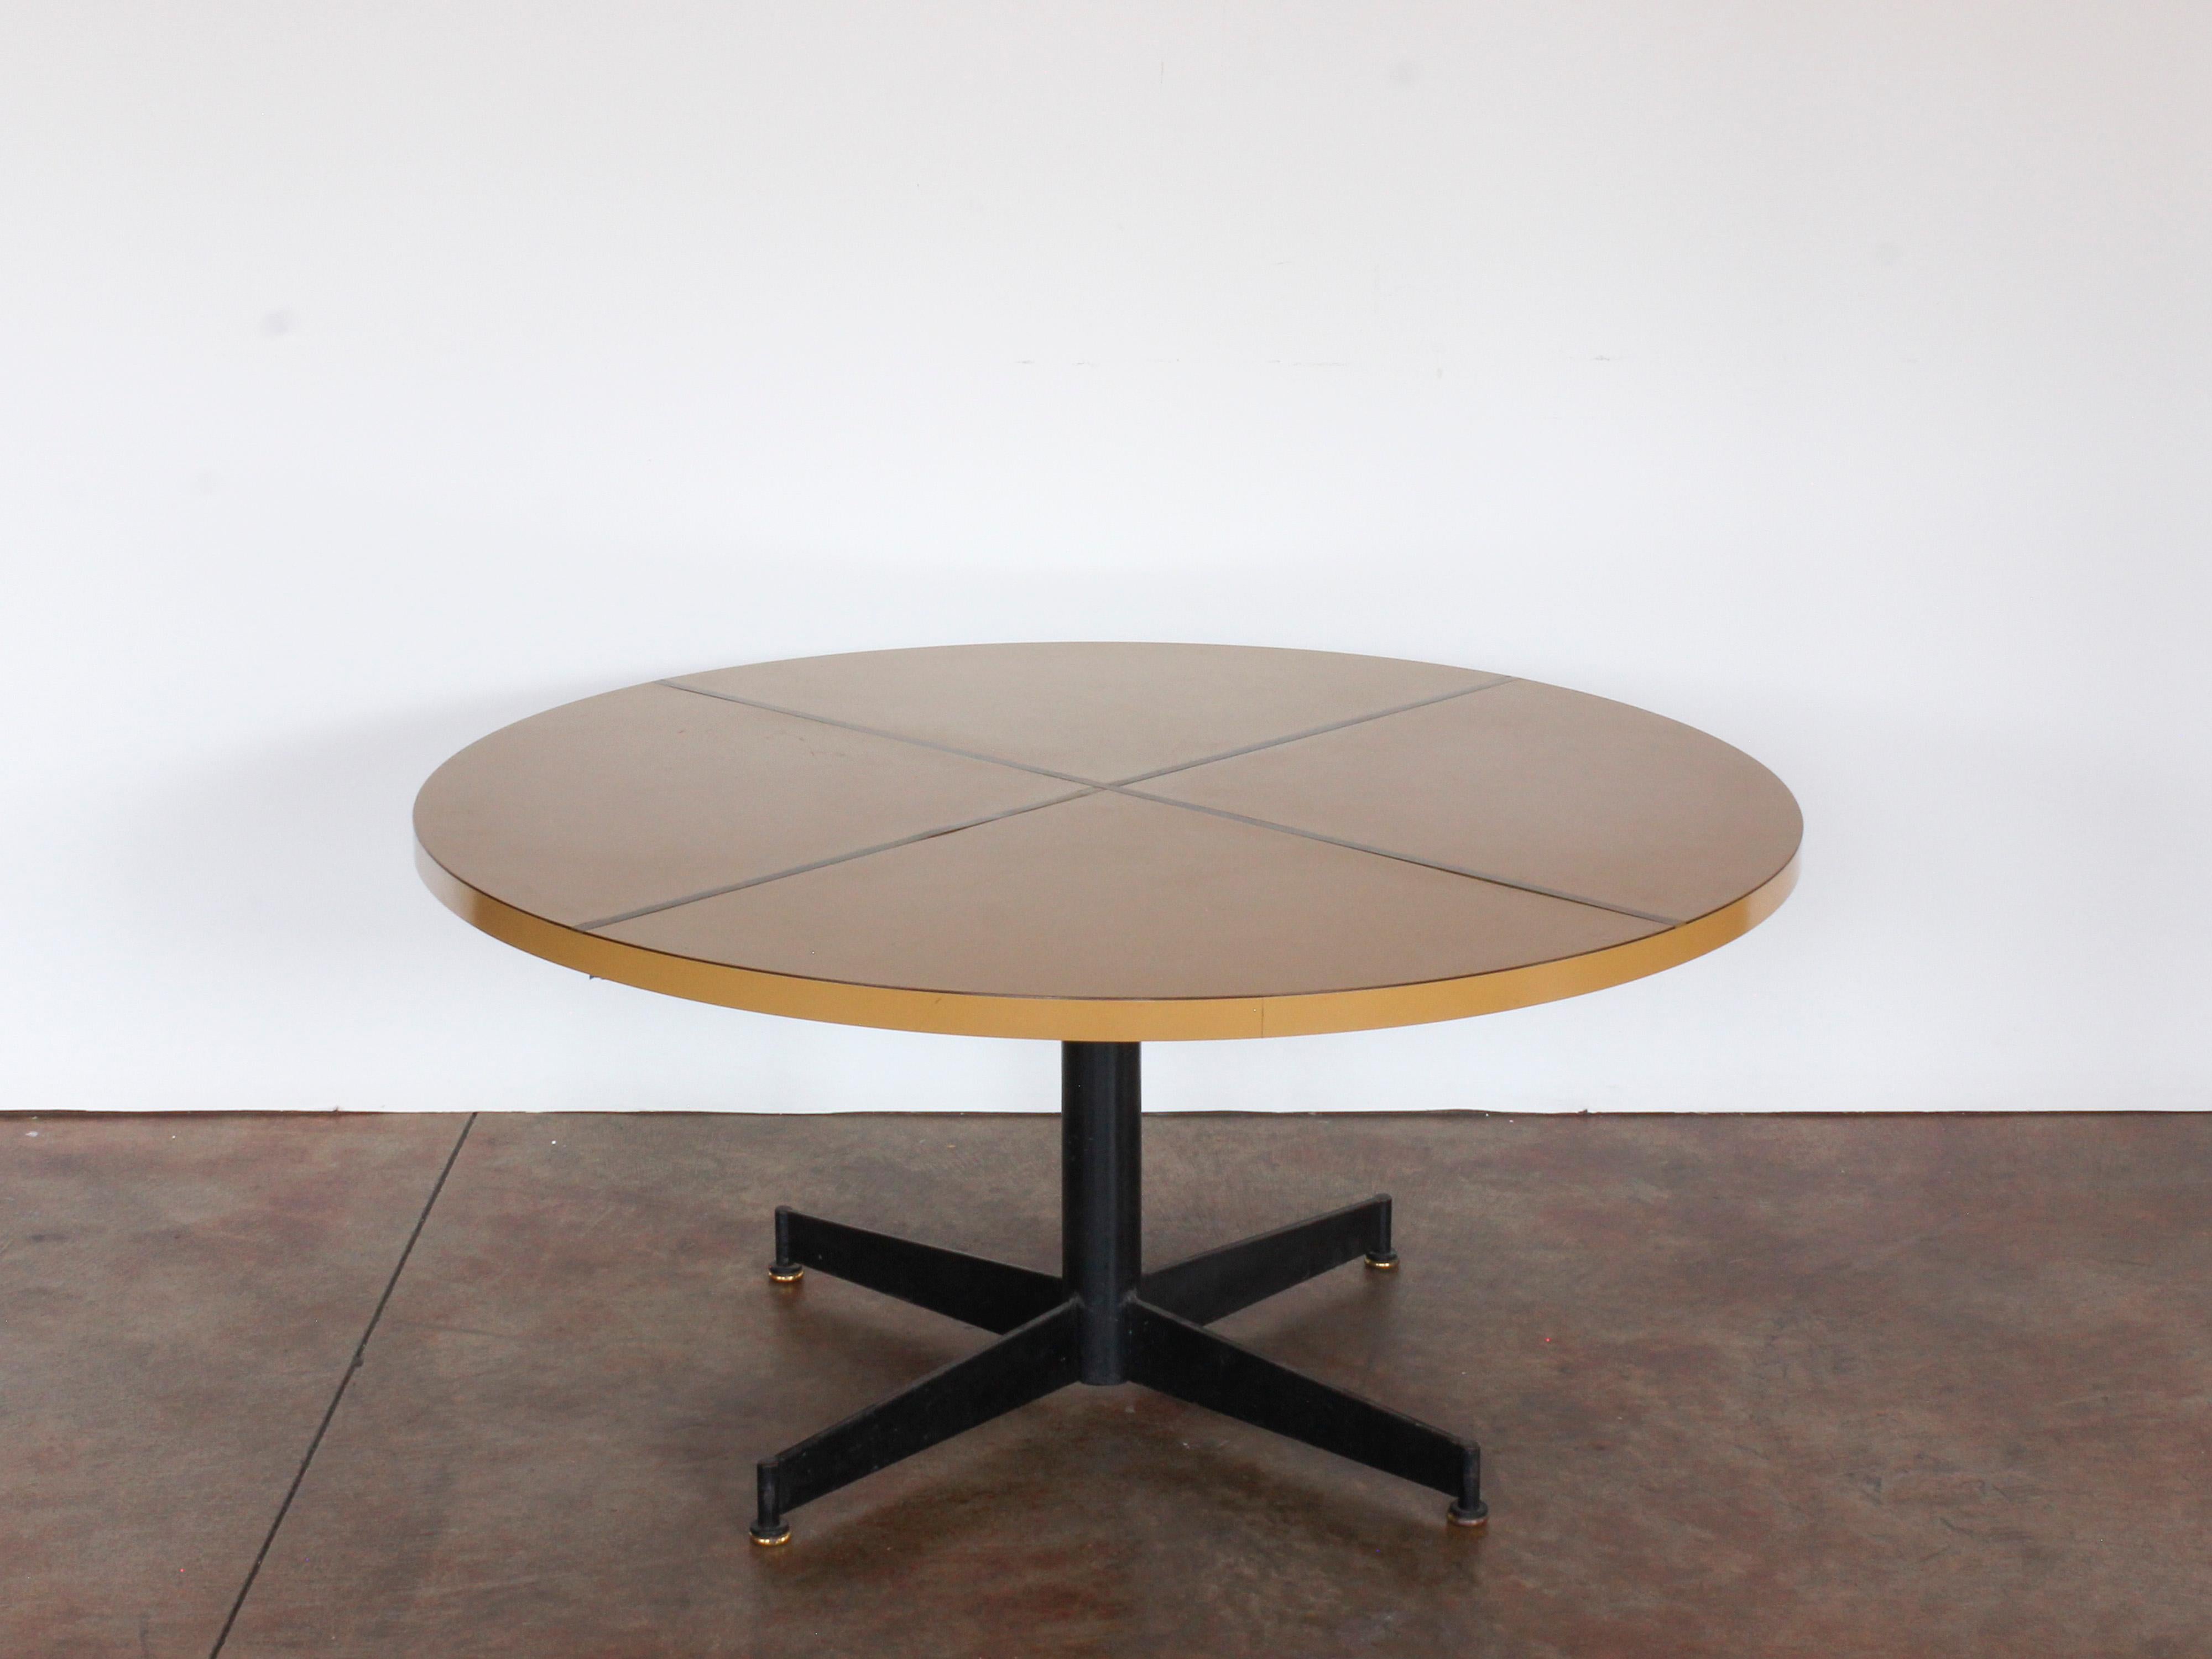 Mid-Century Modern blackened iron and melamine round table with brass inlay, c. 1960. Adjustable height 20-27